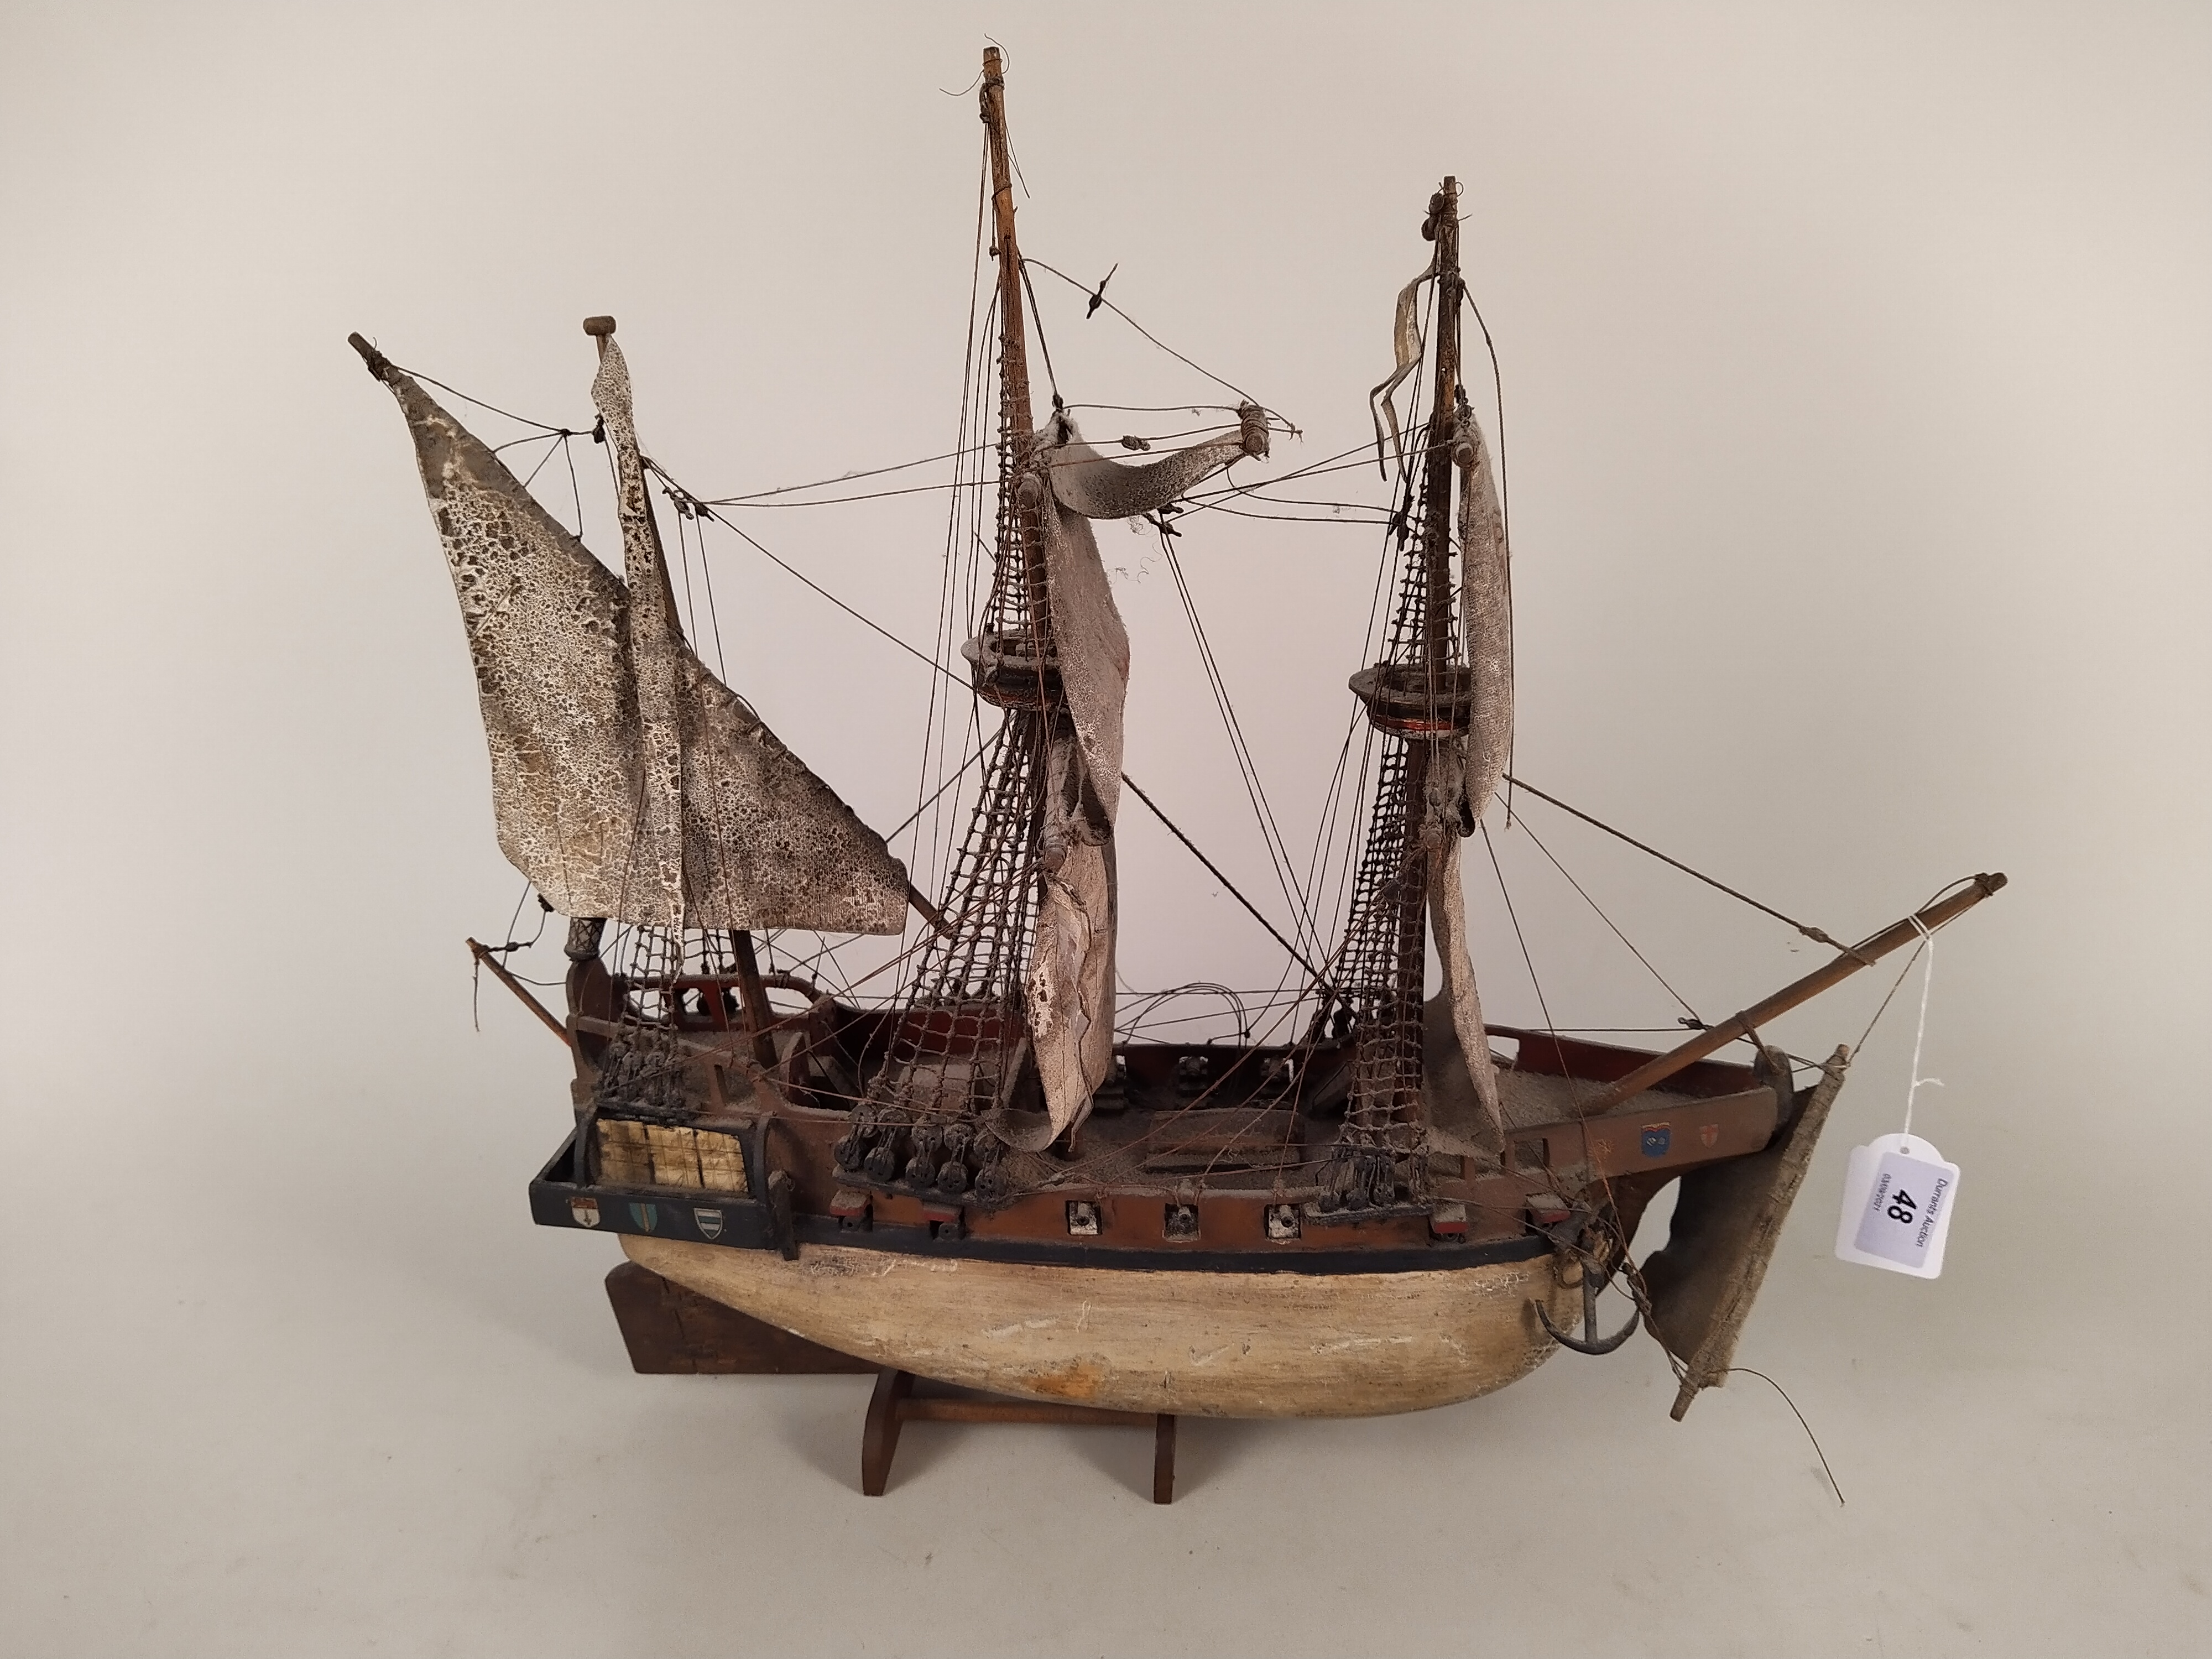 A model of a wooden hulled fully rigged Elizabethan galleon with painted sails